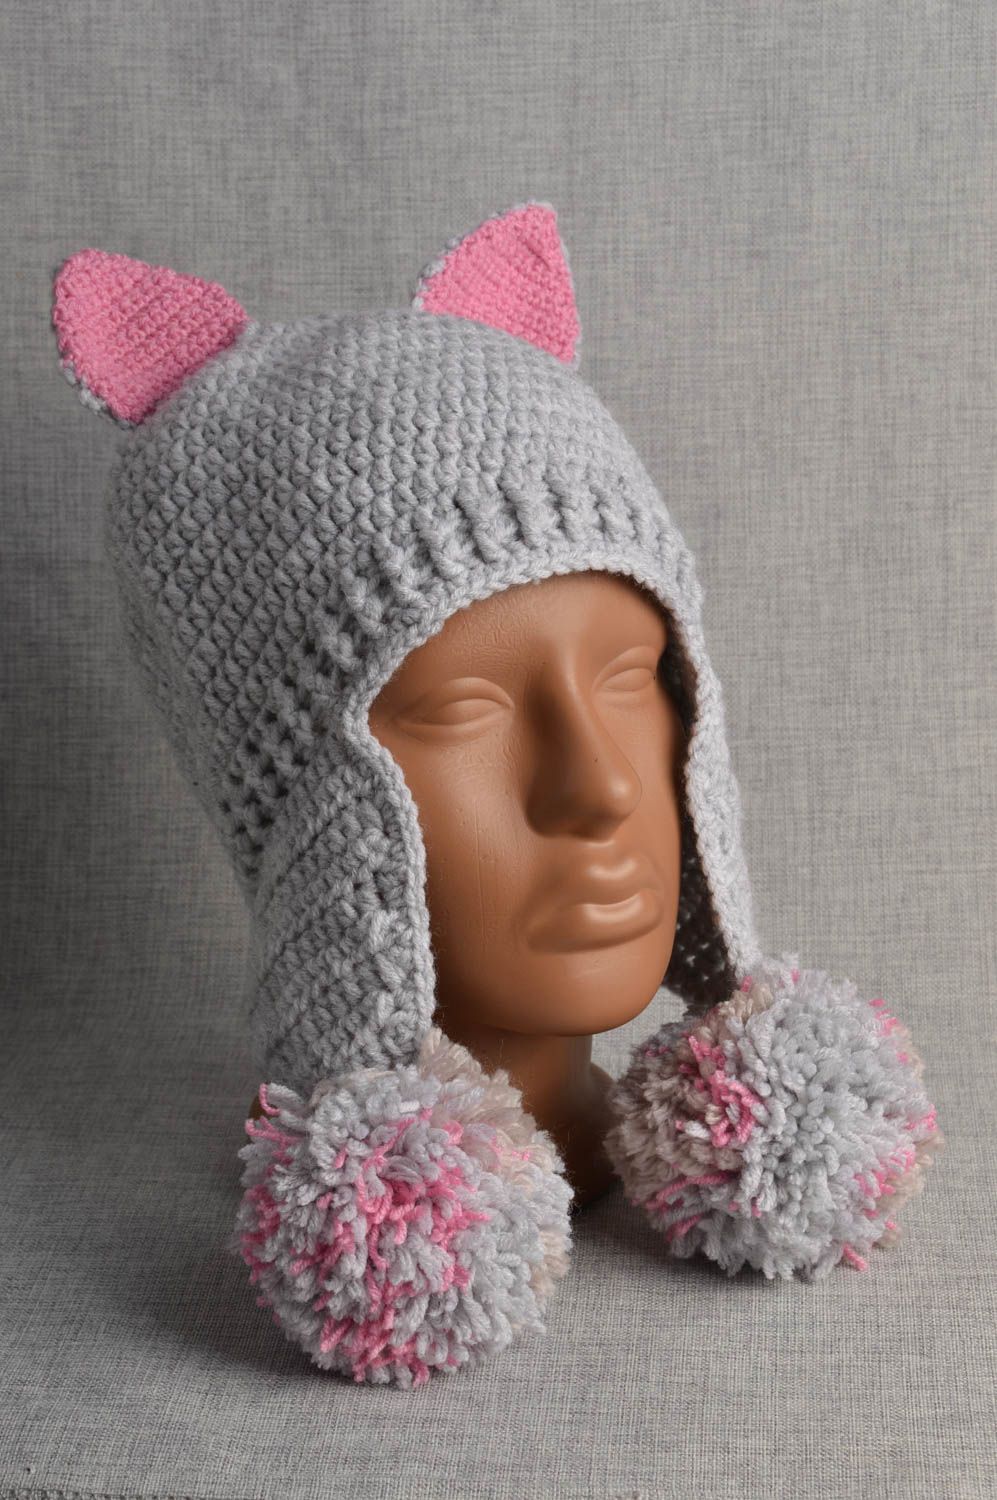 Beautiful handmade crochet hat warm baby hat fashion accessories for her photo 1